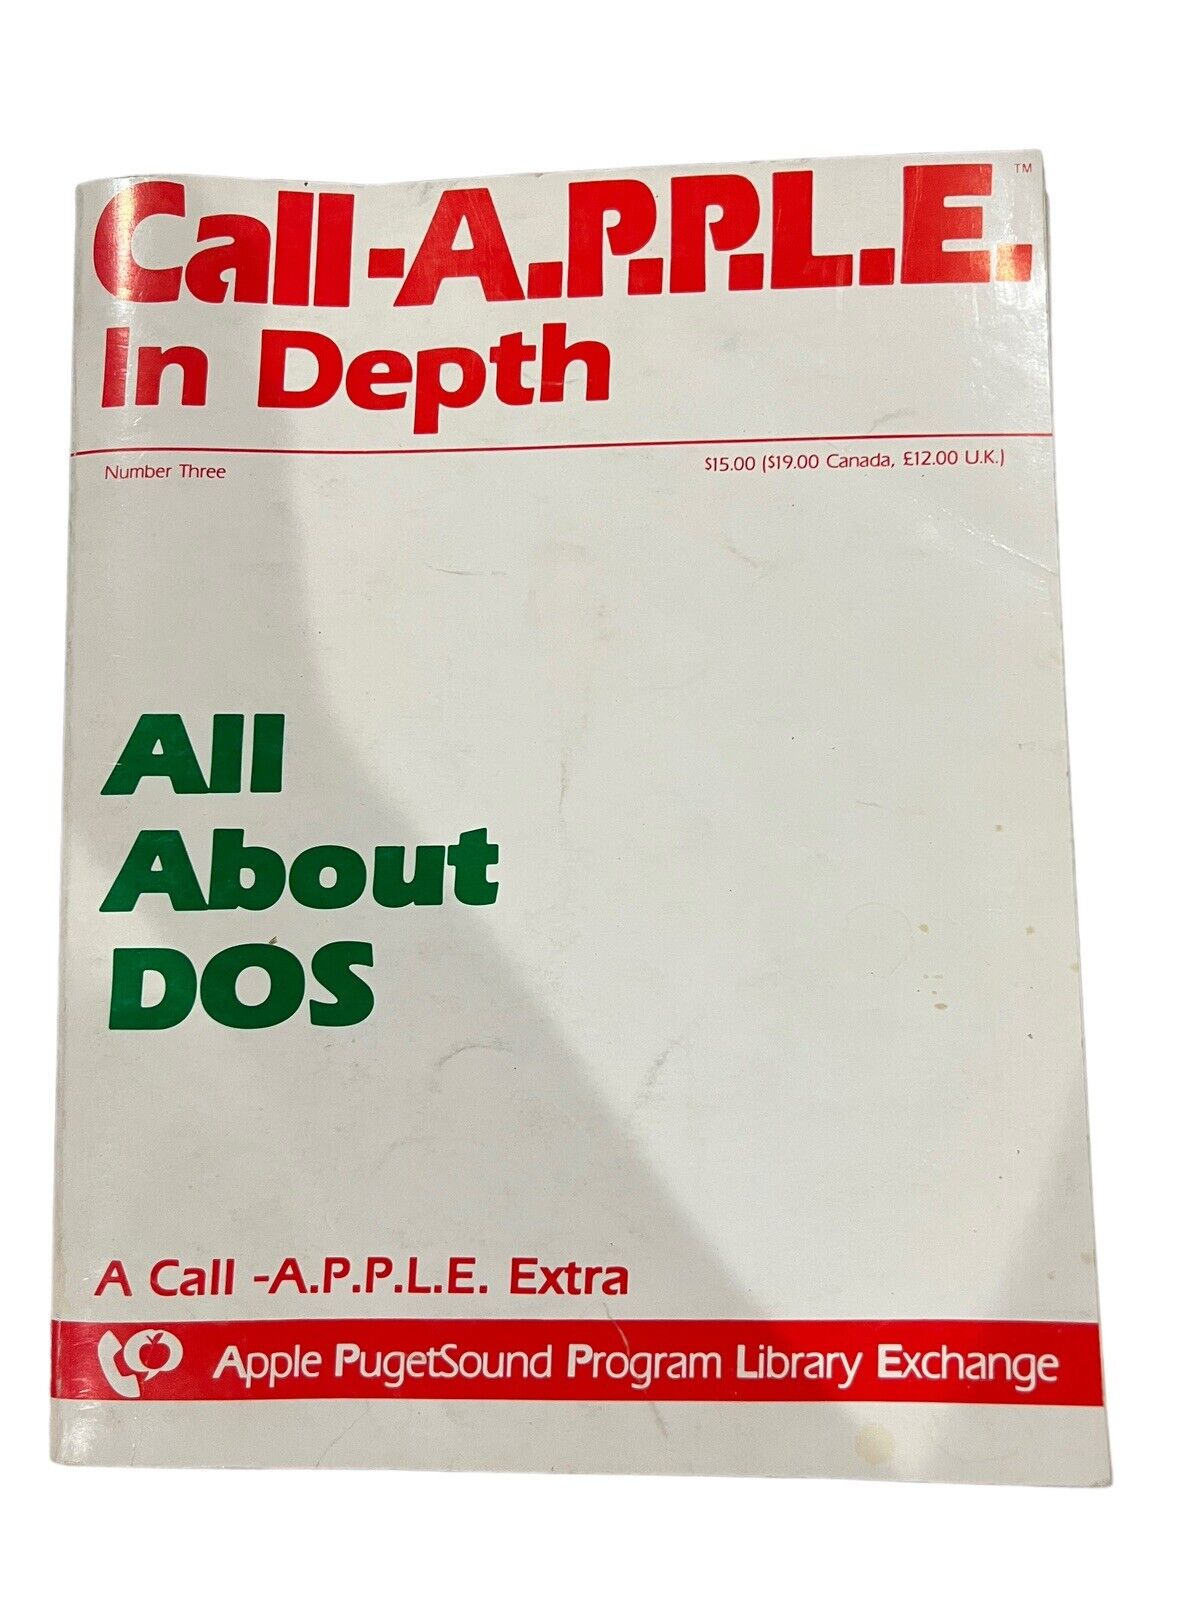 All About Applesoft Call-A.P.P.L.E In Depth Number Three - 288 Pages Vintage